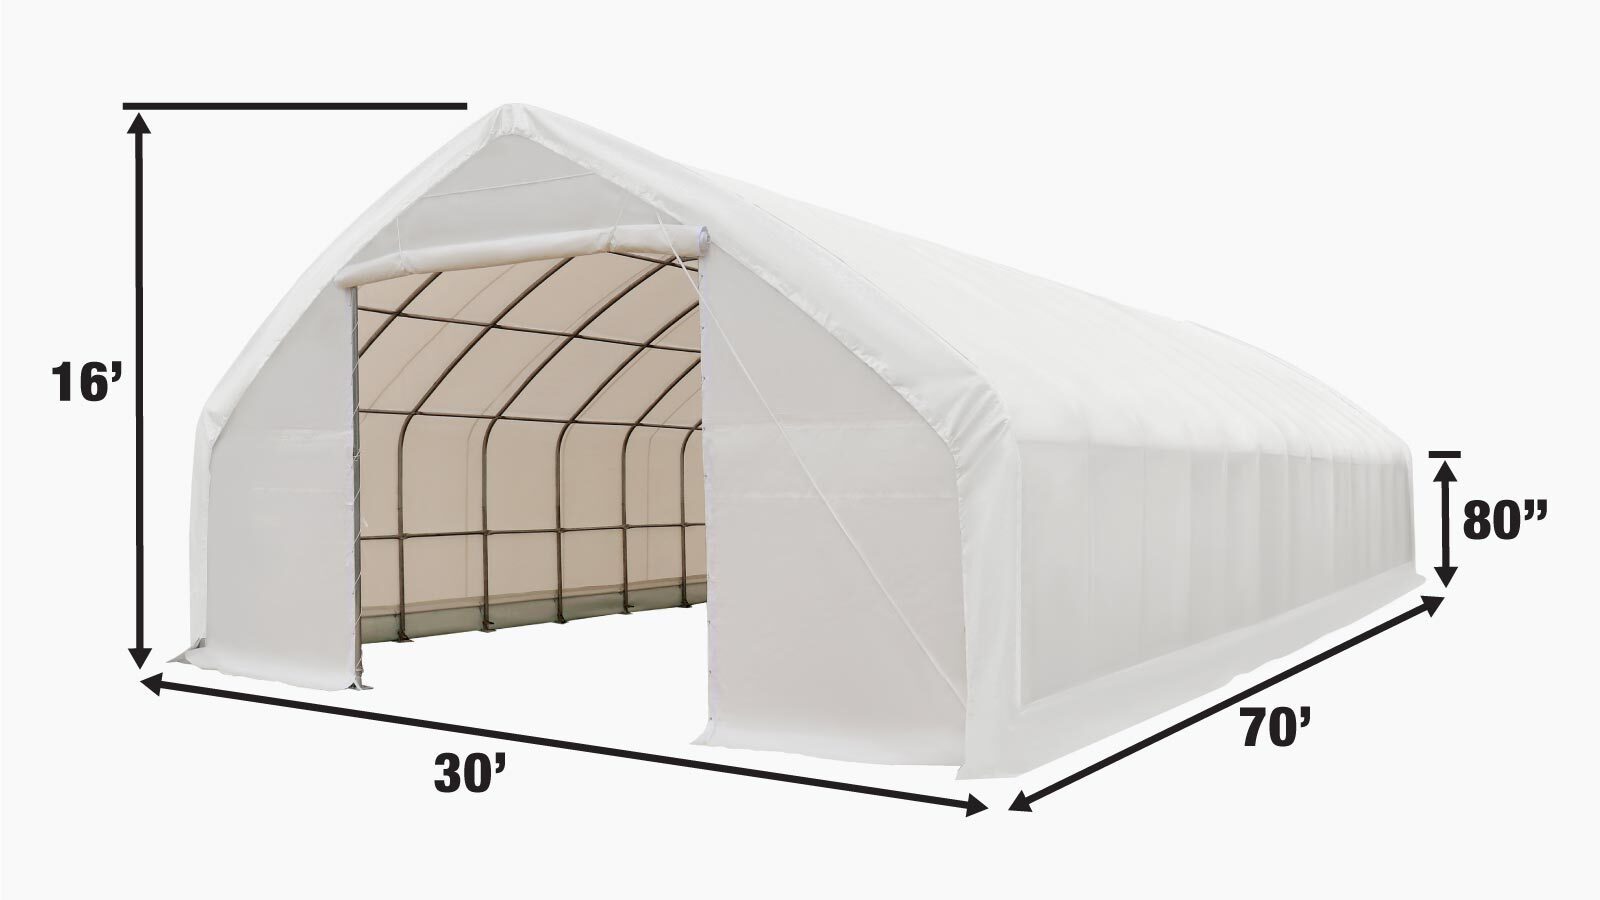 TMG Industrial 30' x 70' Straight Wall Peak Ceiling Storage Shelter with Heavy Duty 17 oz PVC Cover & Drive Through Doors, TMG-ST3070V-specifications-image